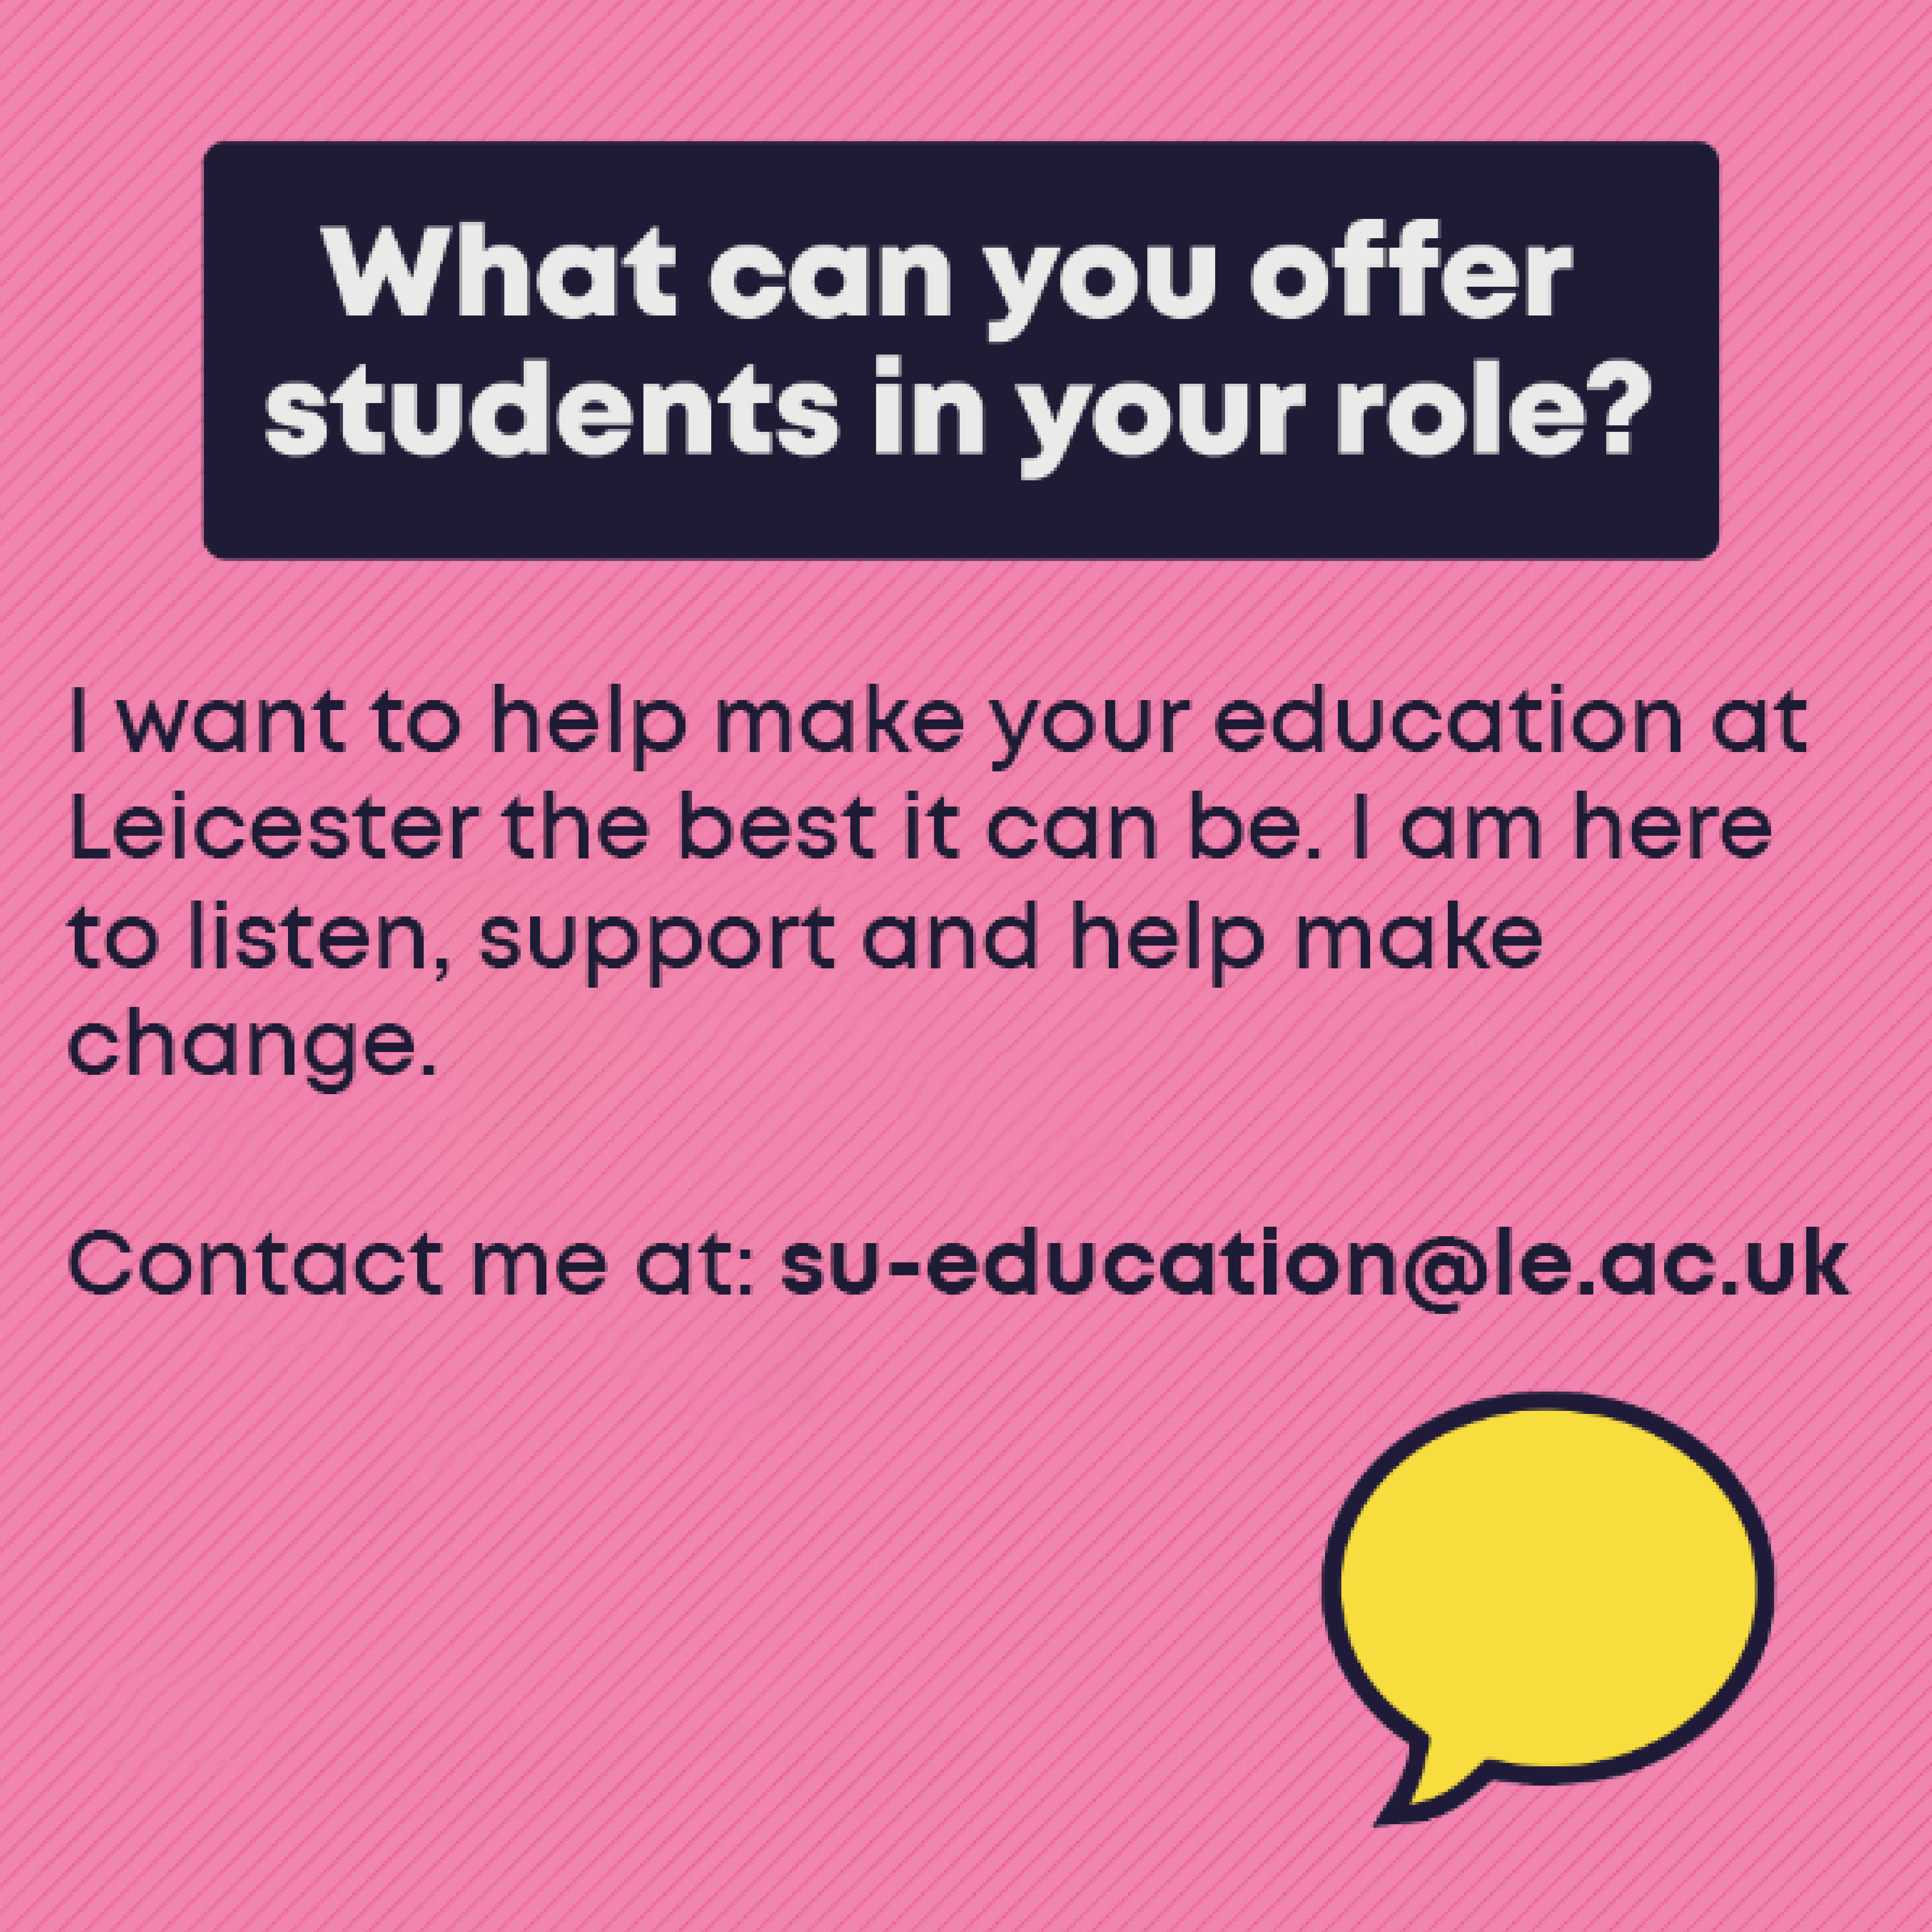 What you can offer students in your role: I want to help make your education at Leicester the best it can be. I am here to listen, support and help make change. Contact me at su-education@le.ac.uk.